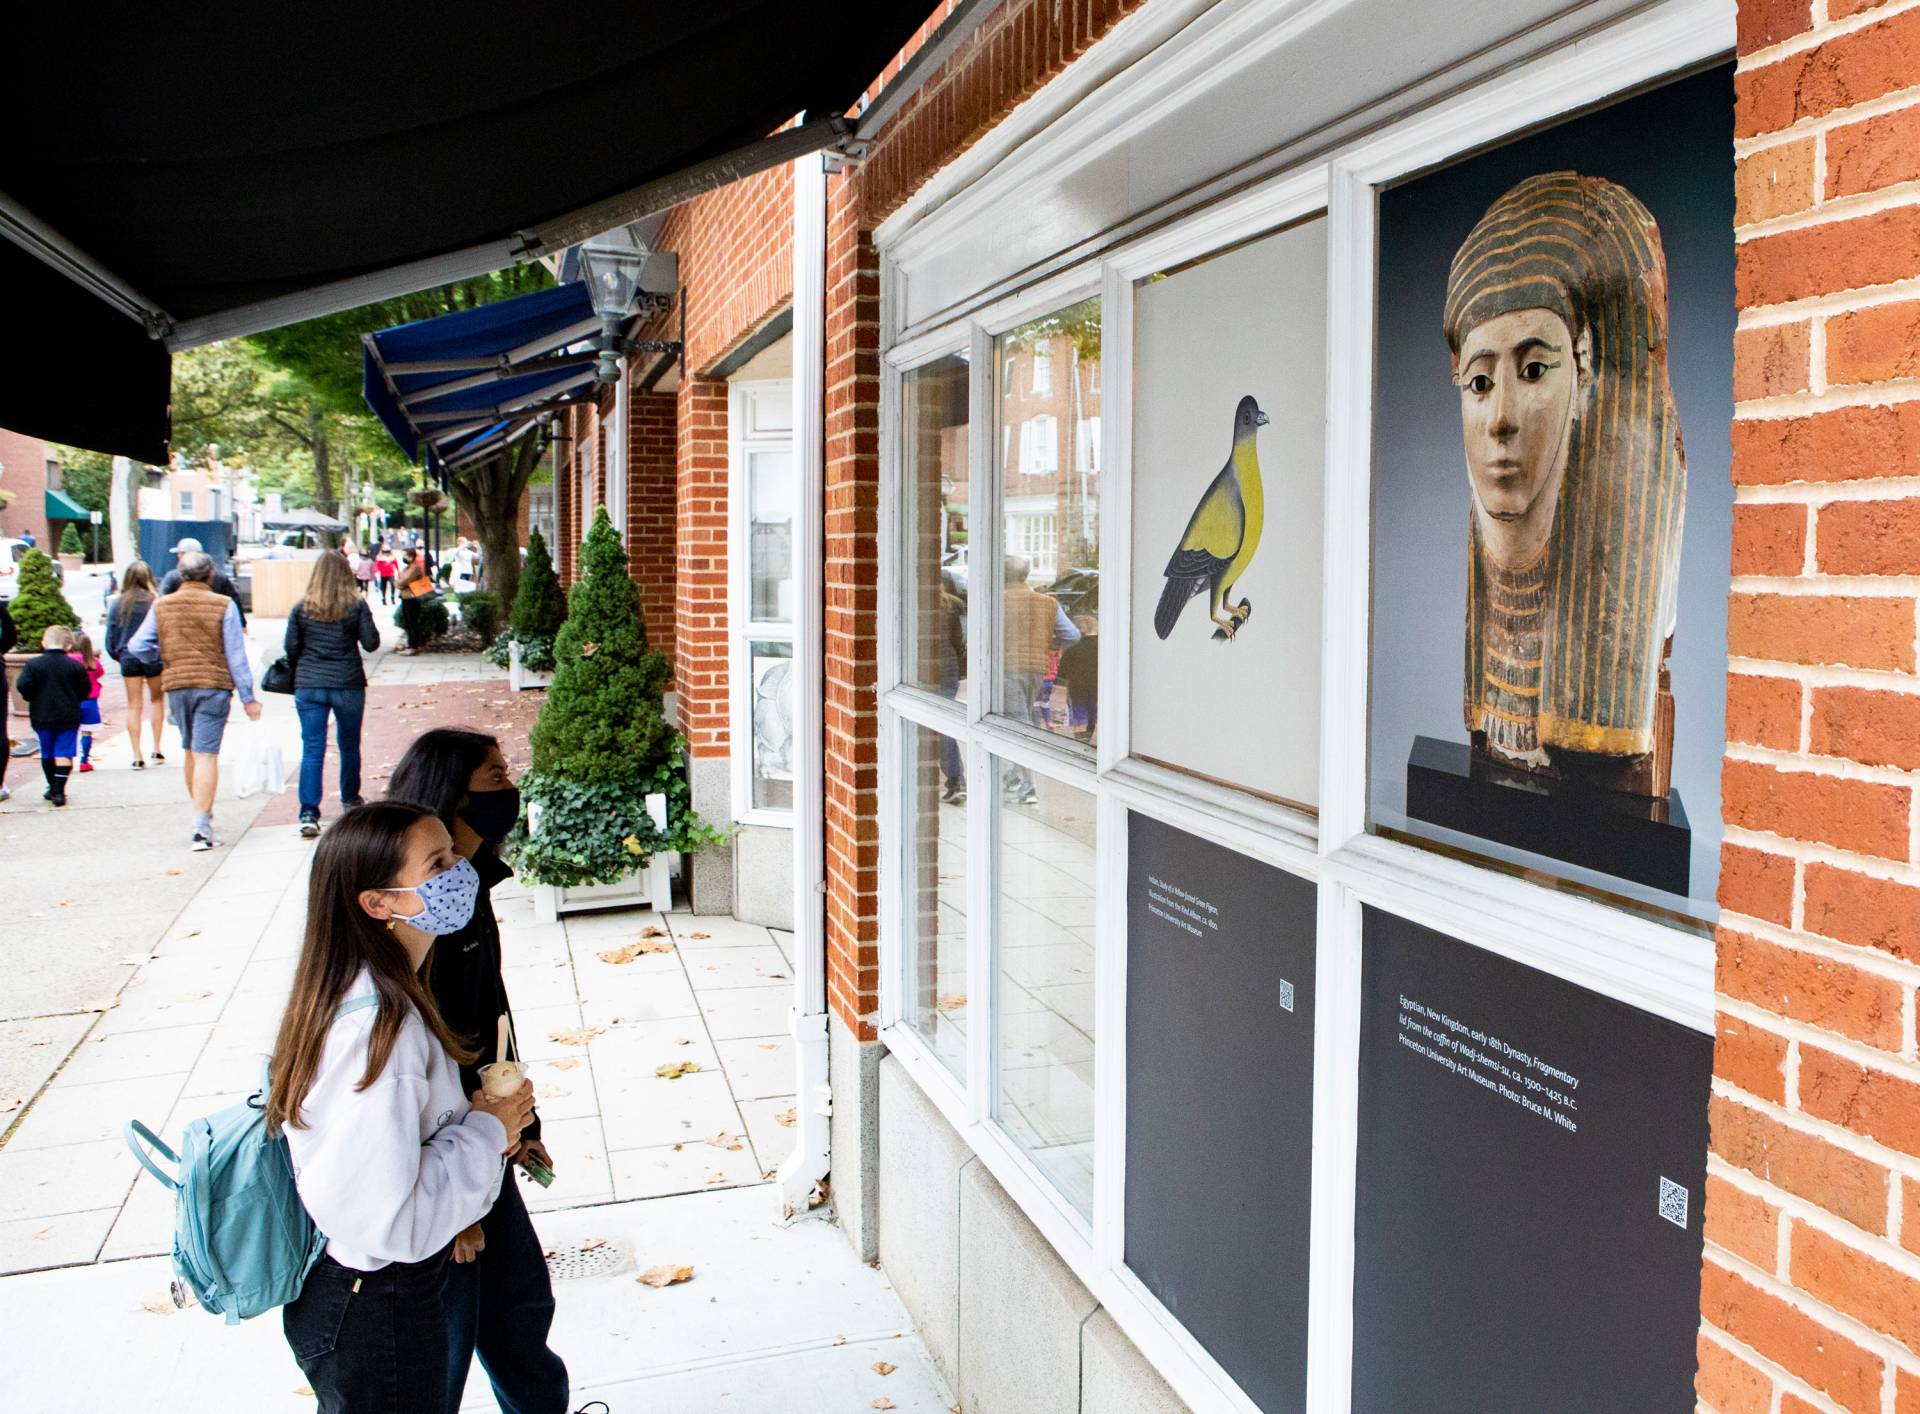 passers-by stop to look at art in shop windows